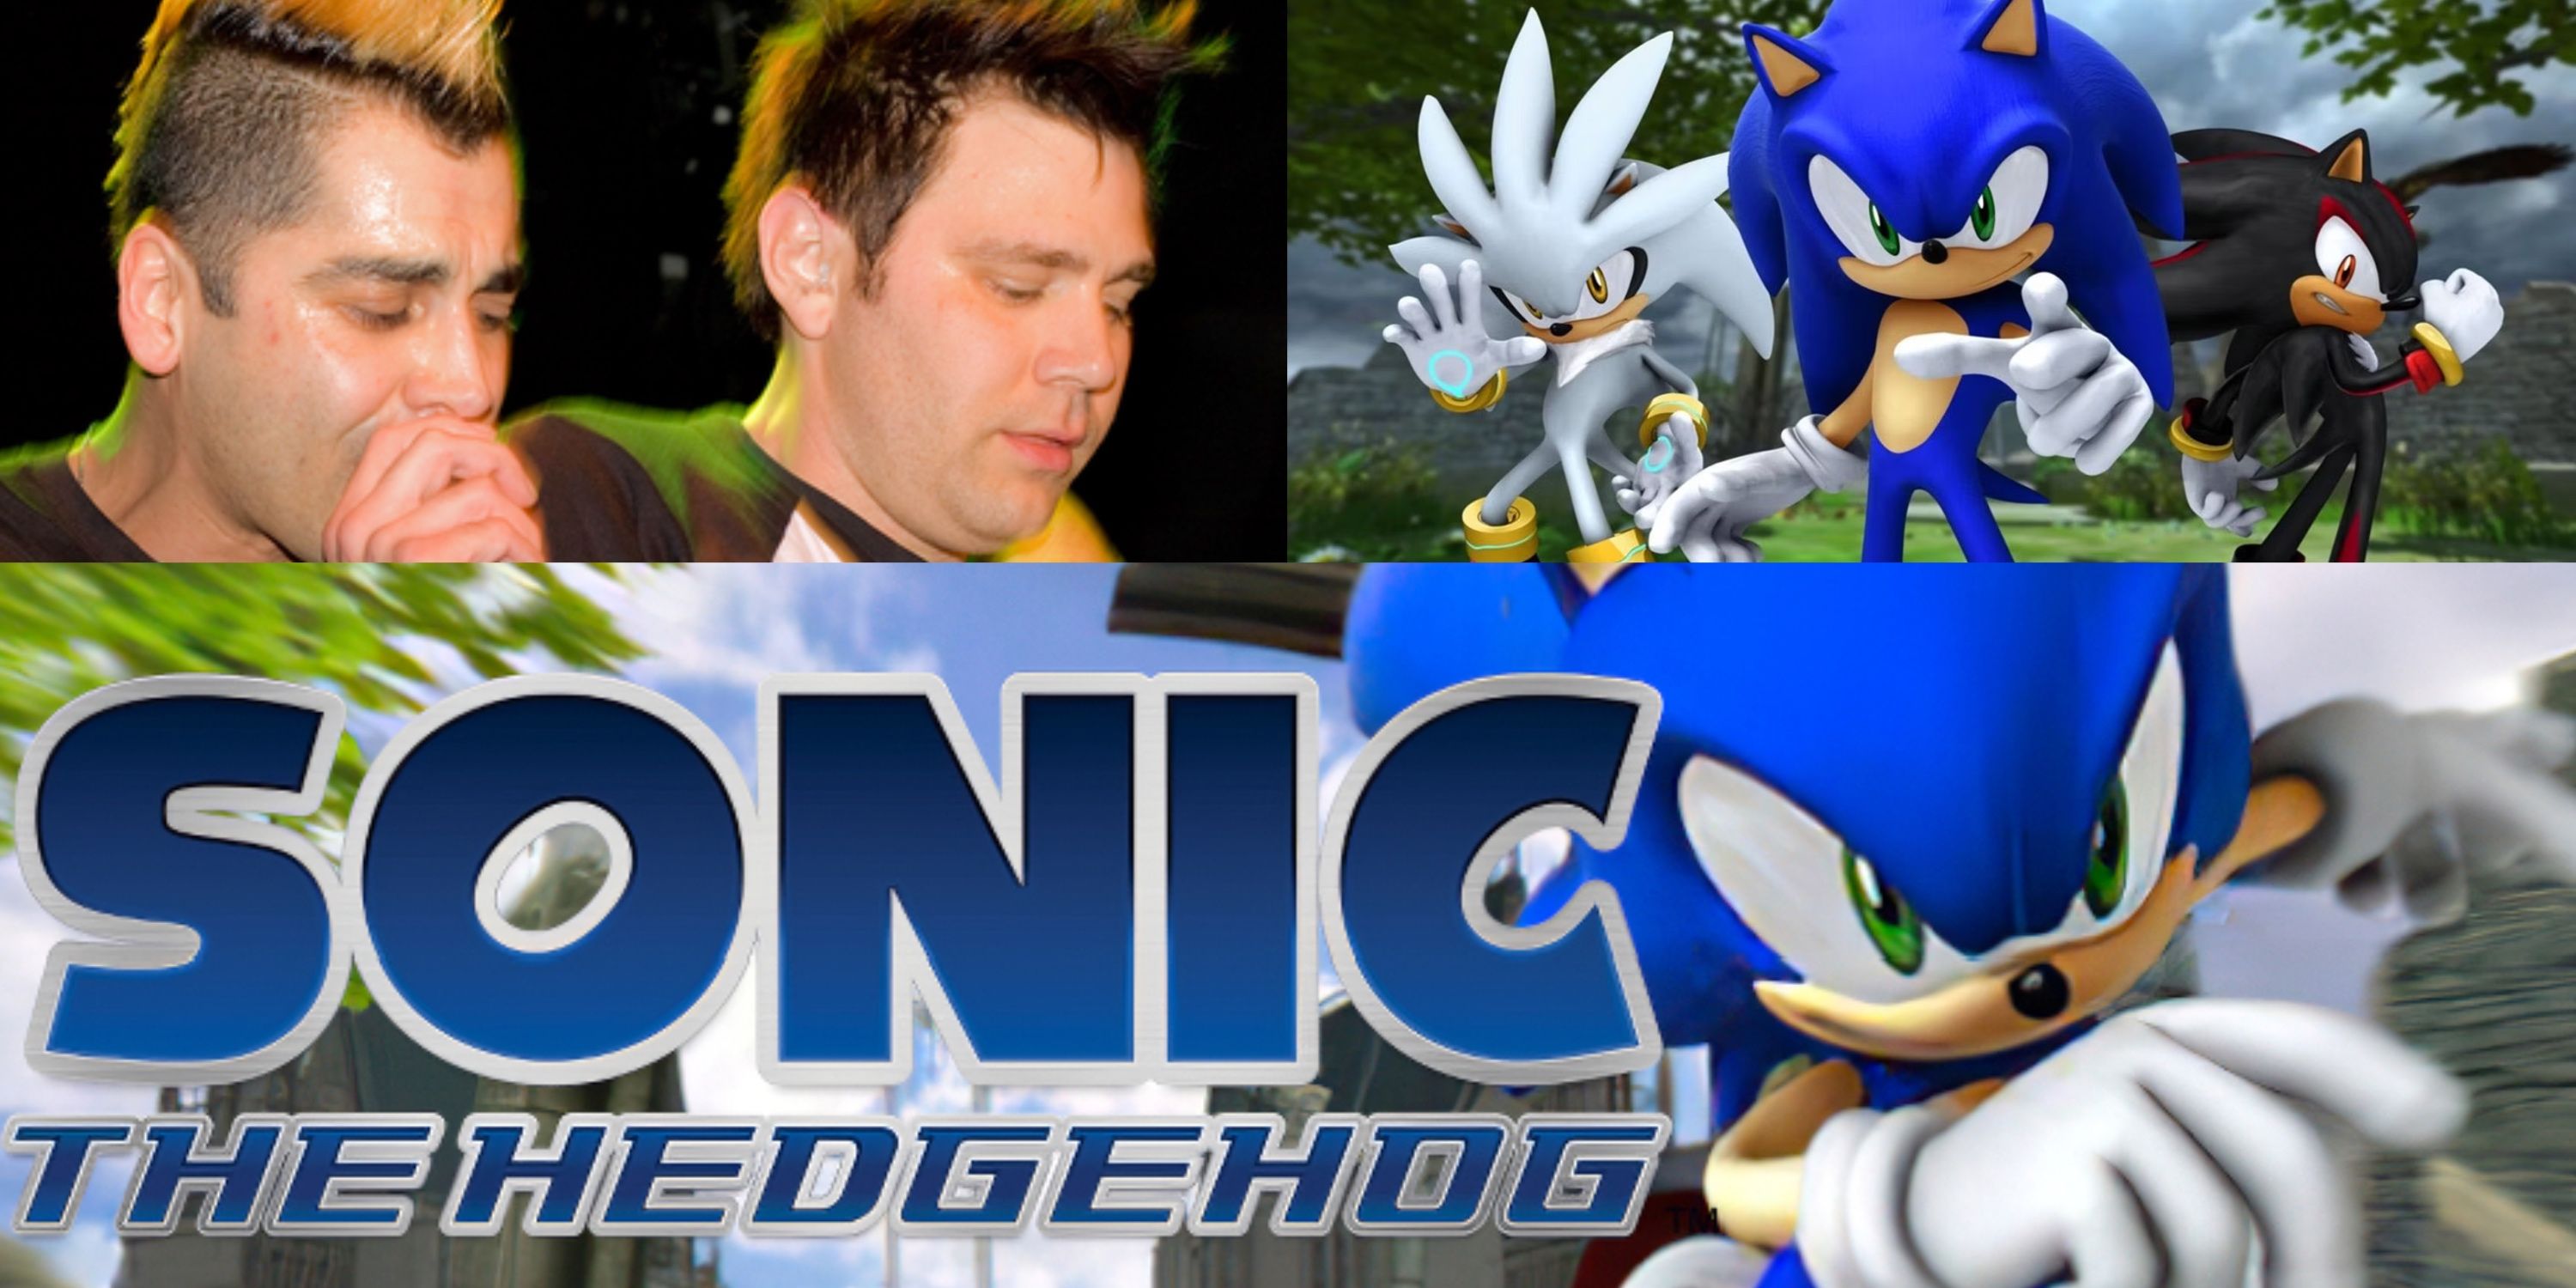 Zebrahead singers, and Sonic the hedgehog 2006 cover art